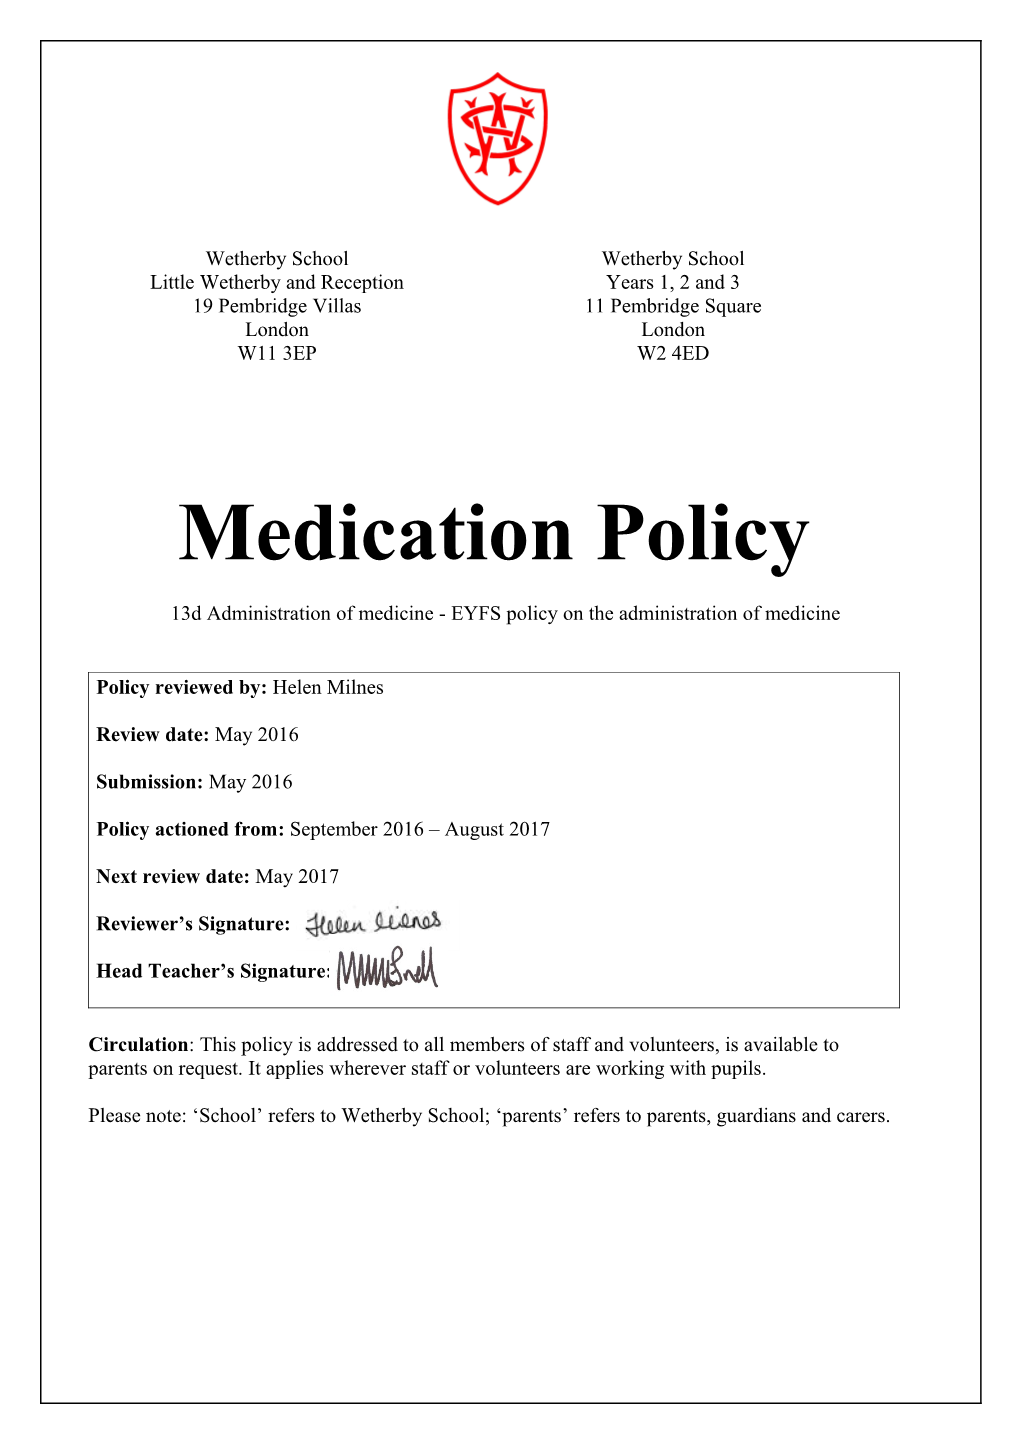 13D Administration of Medicine- EYFS Policy on the Administration of Medicine